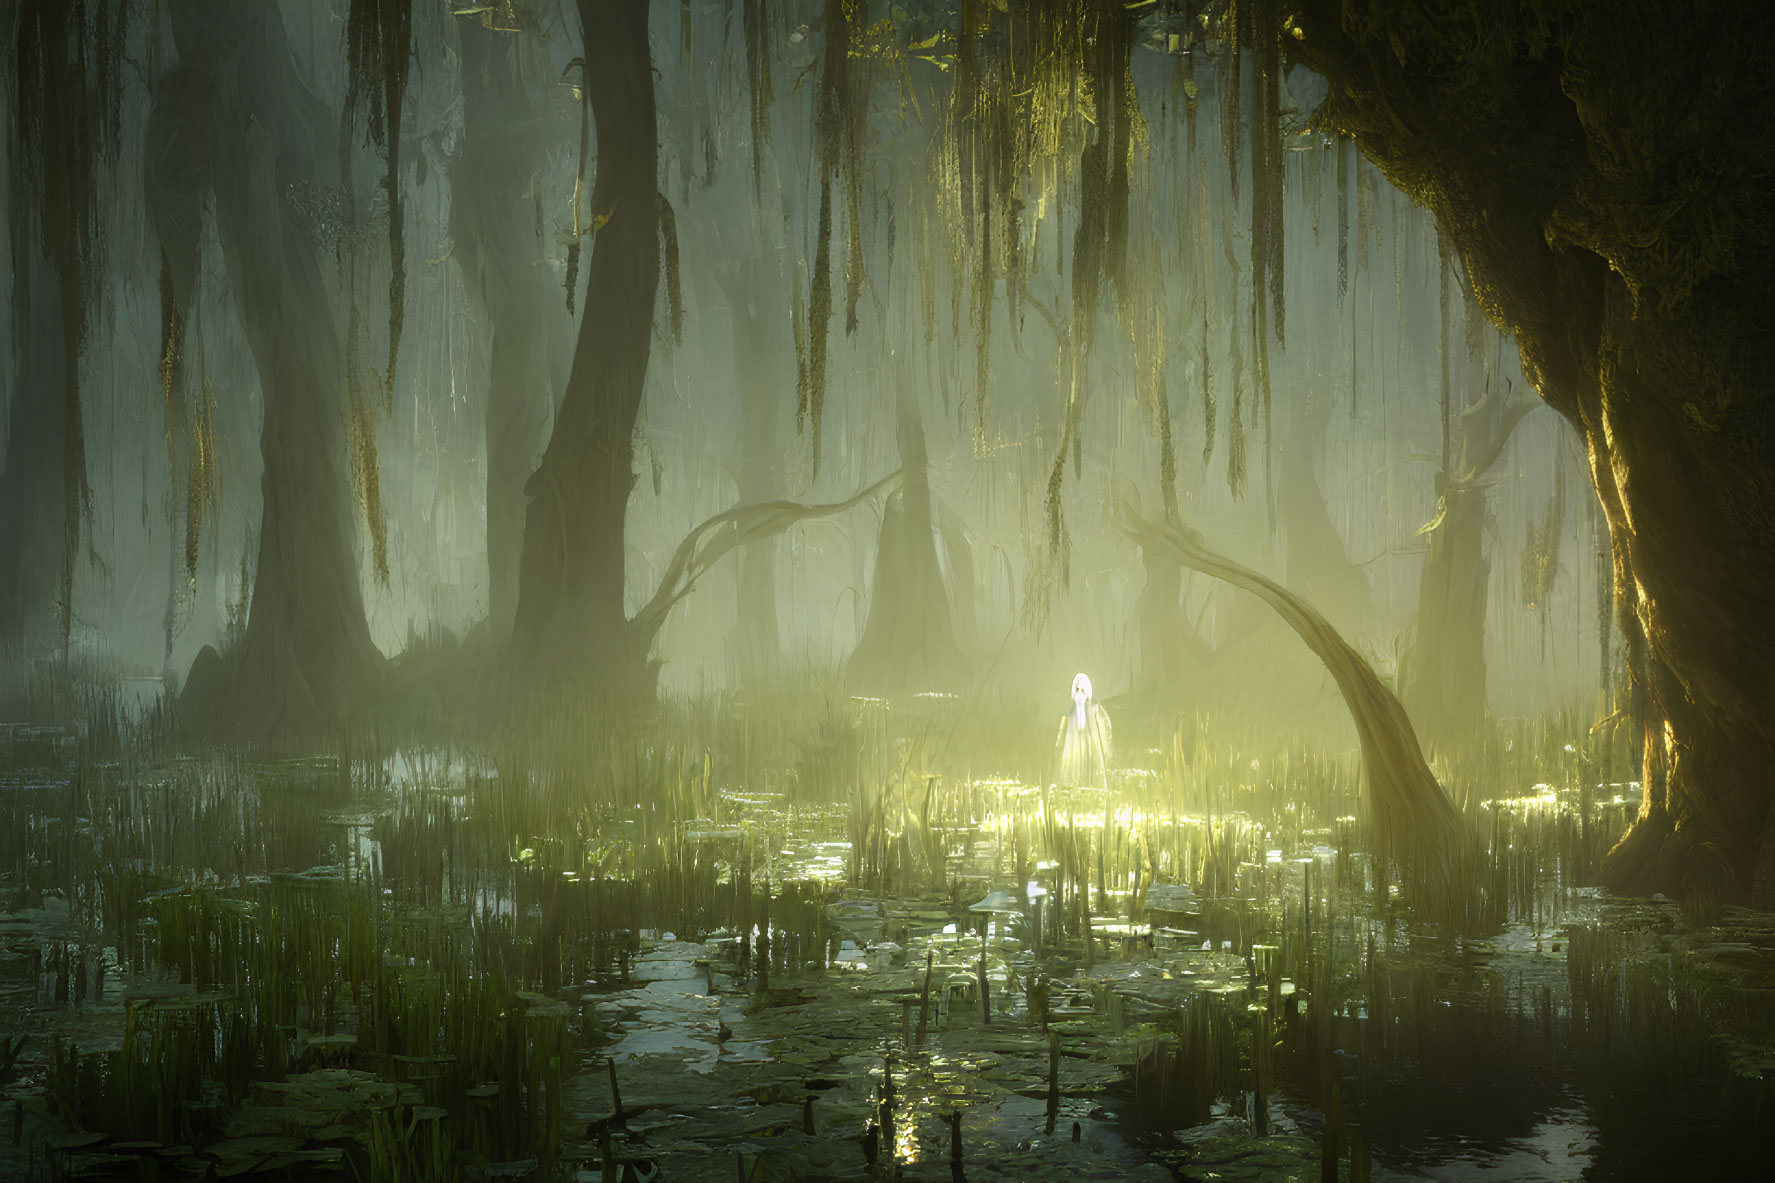 Enchanting forest scene with tall trees, moss, pond, and figure in soft light